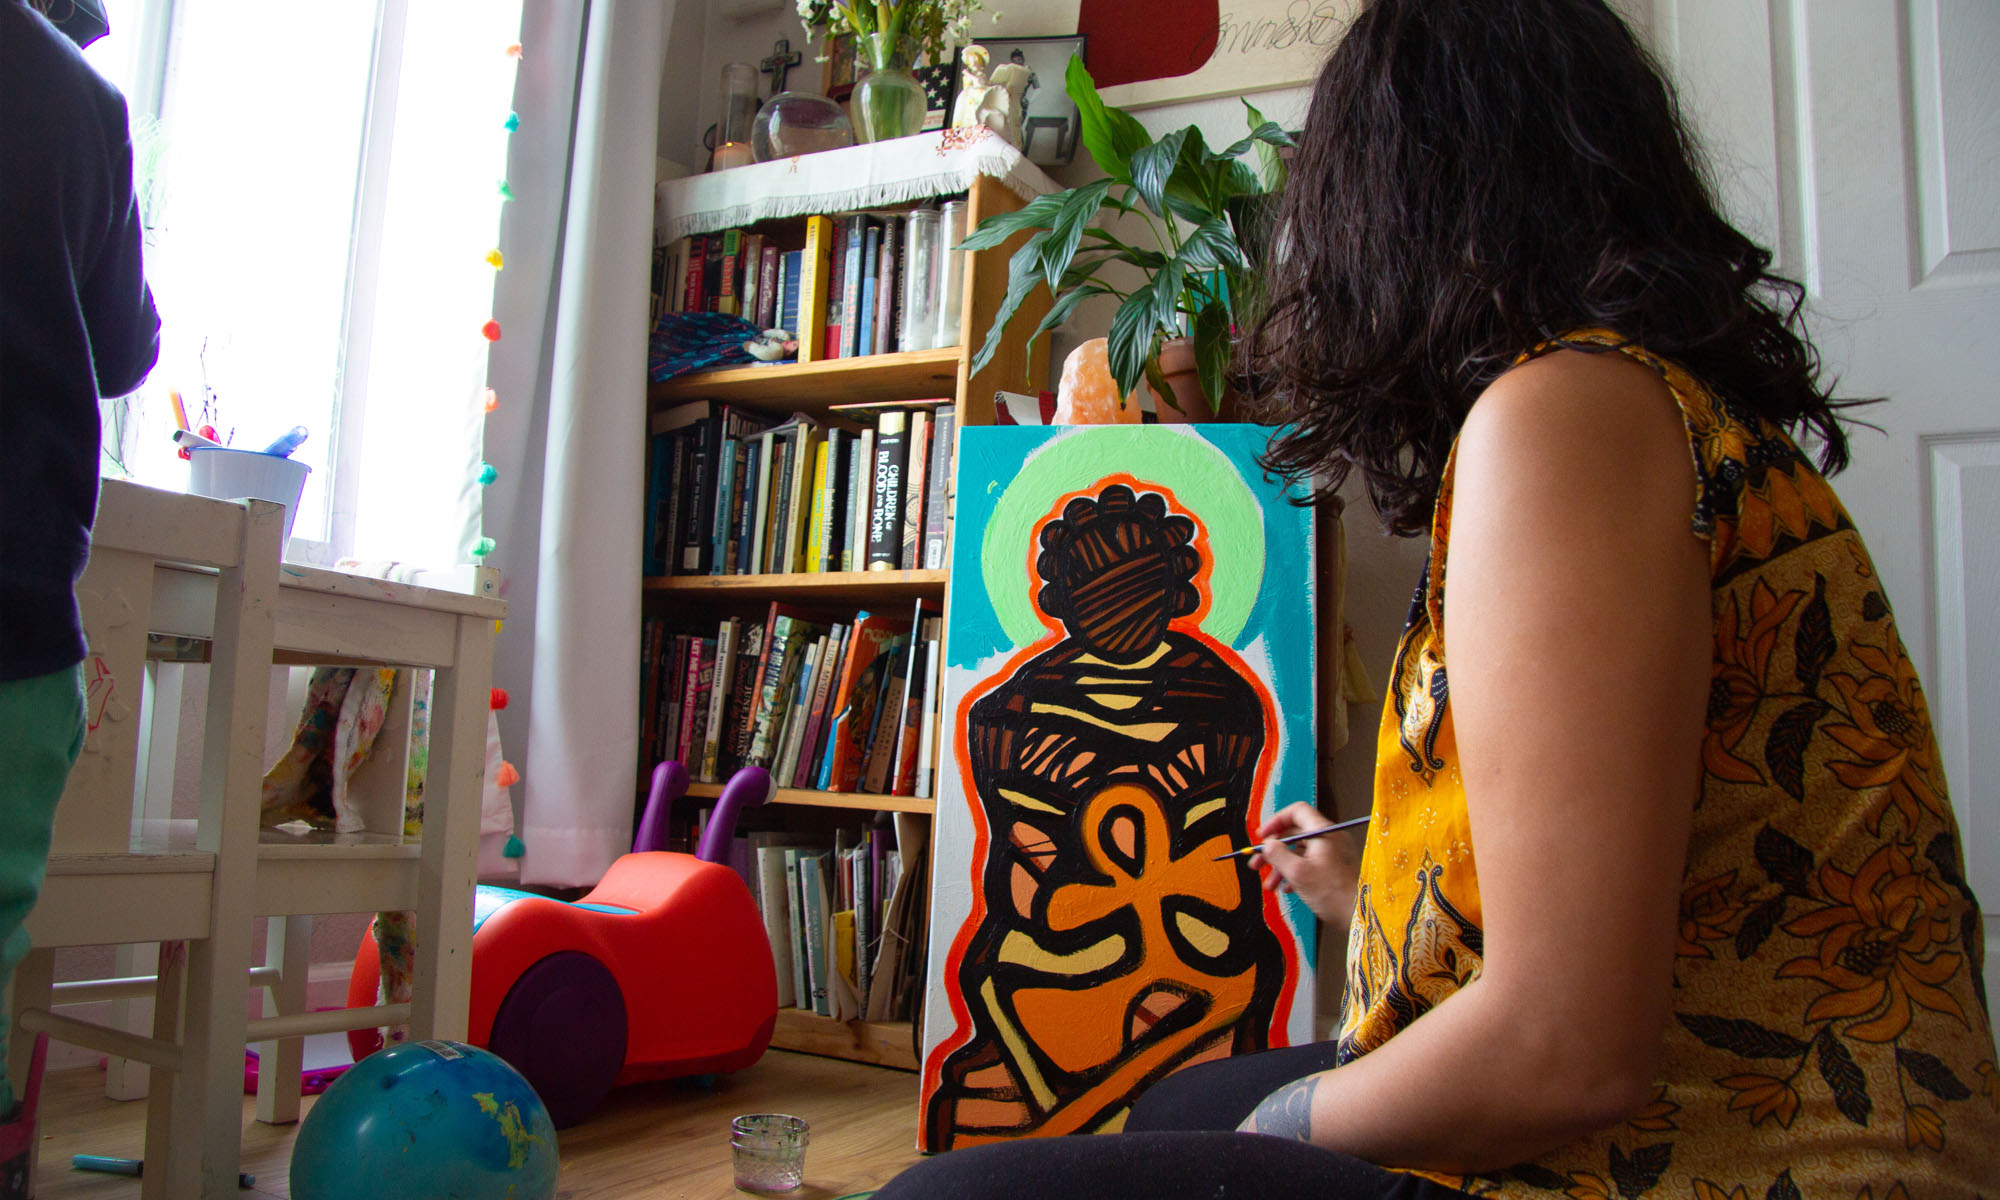 Artist Francis sits on the floor of her living room and adds the final touches to a painting of a Black person holding an Ankh. Photo: Kathryn Styer